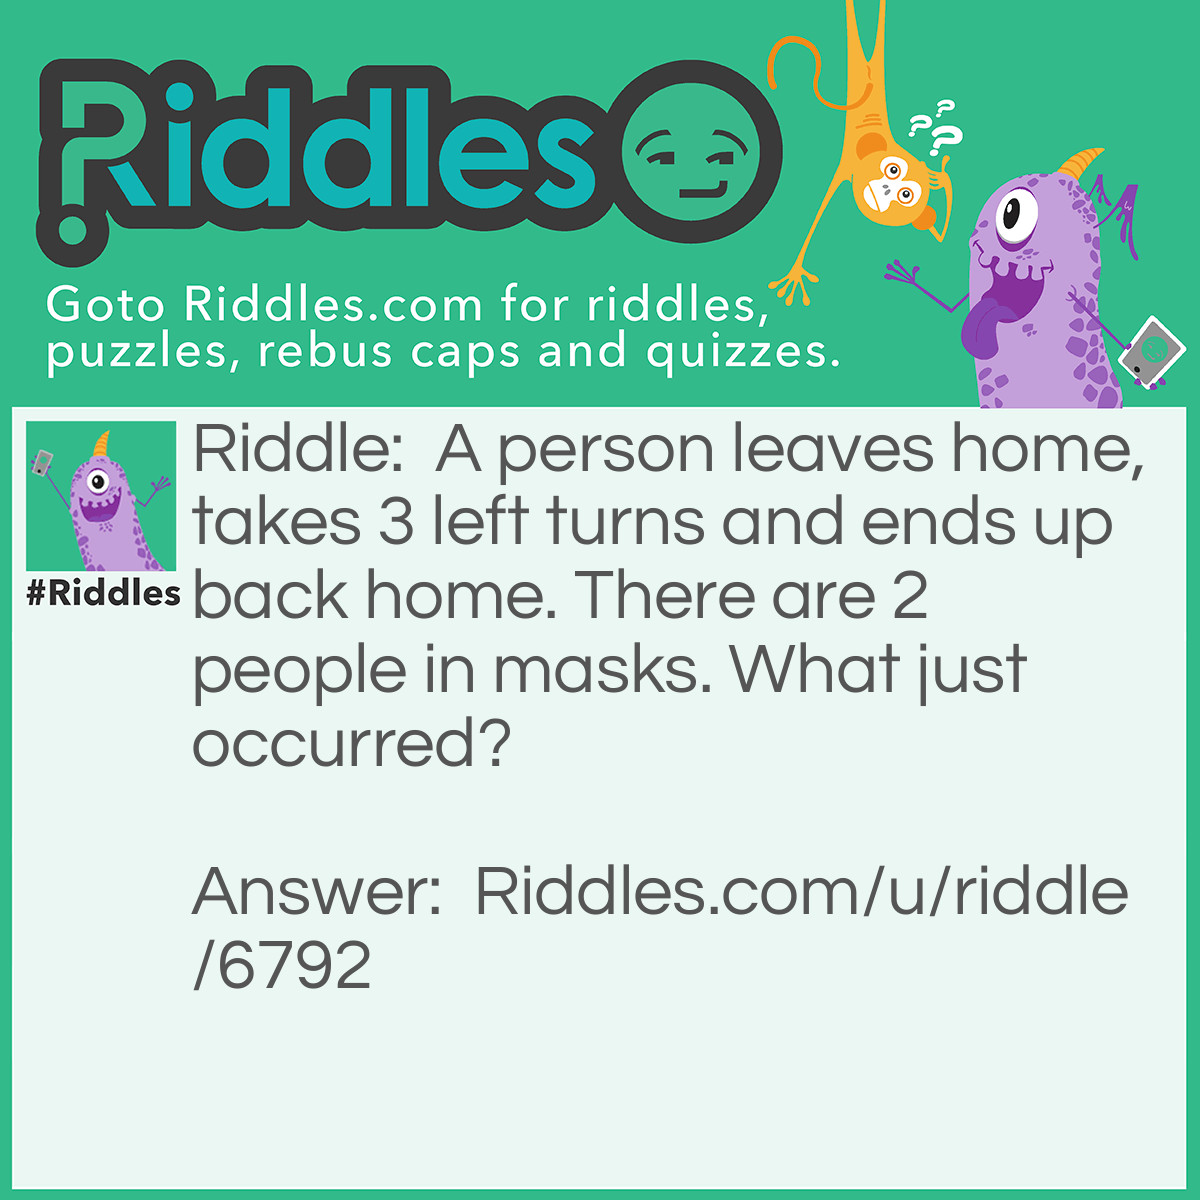 Riddle: A person leaves home, takes 3 left turns and ends up back home. There are 2 people in masks. What just occurred? Answer: A homerun in Baseball.